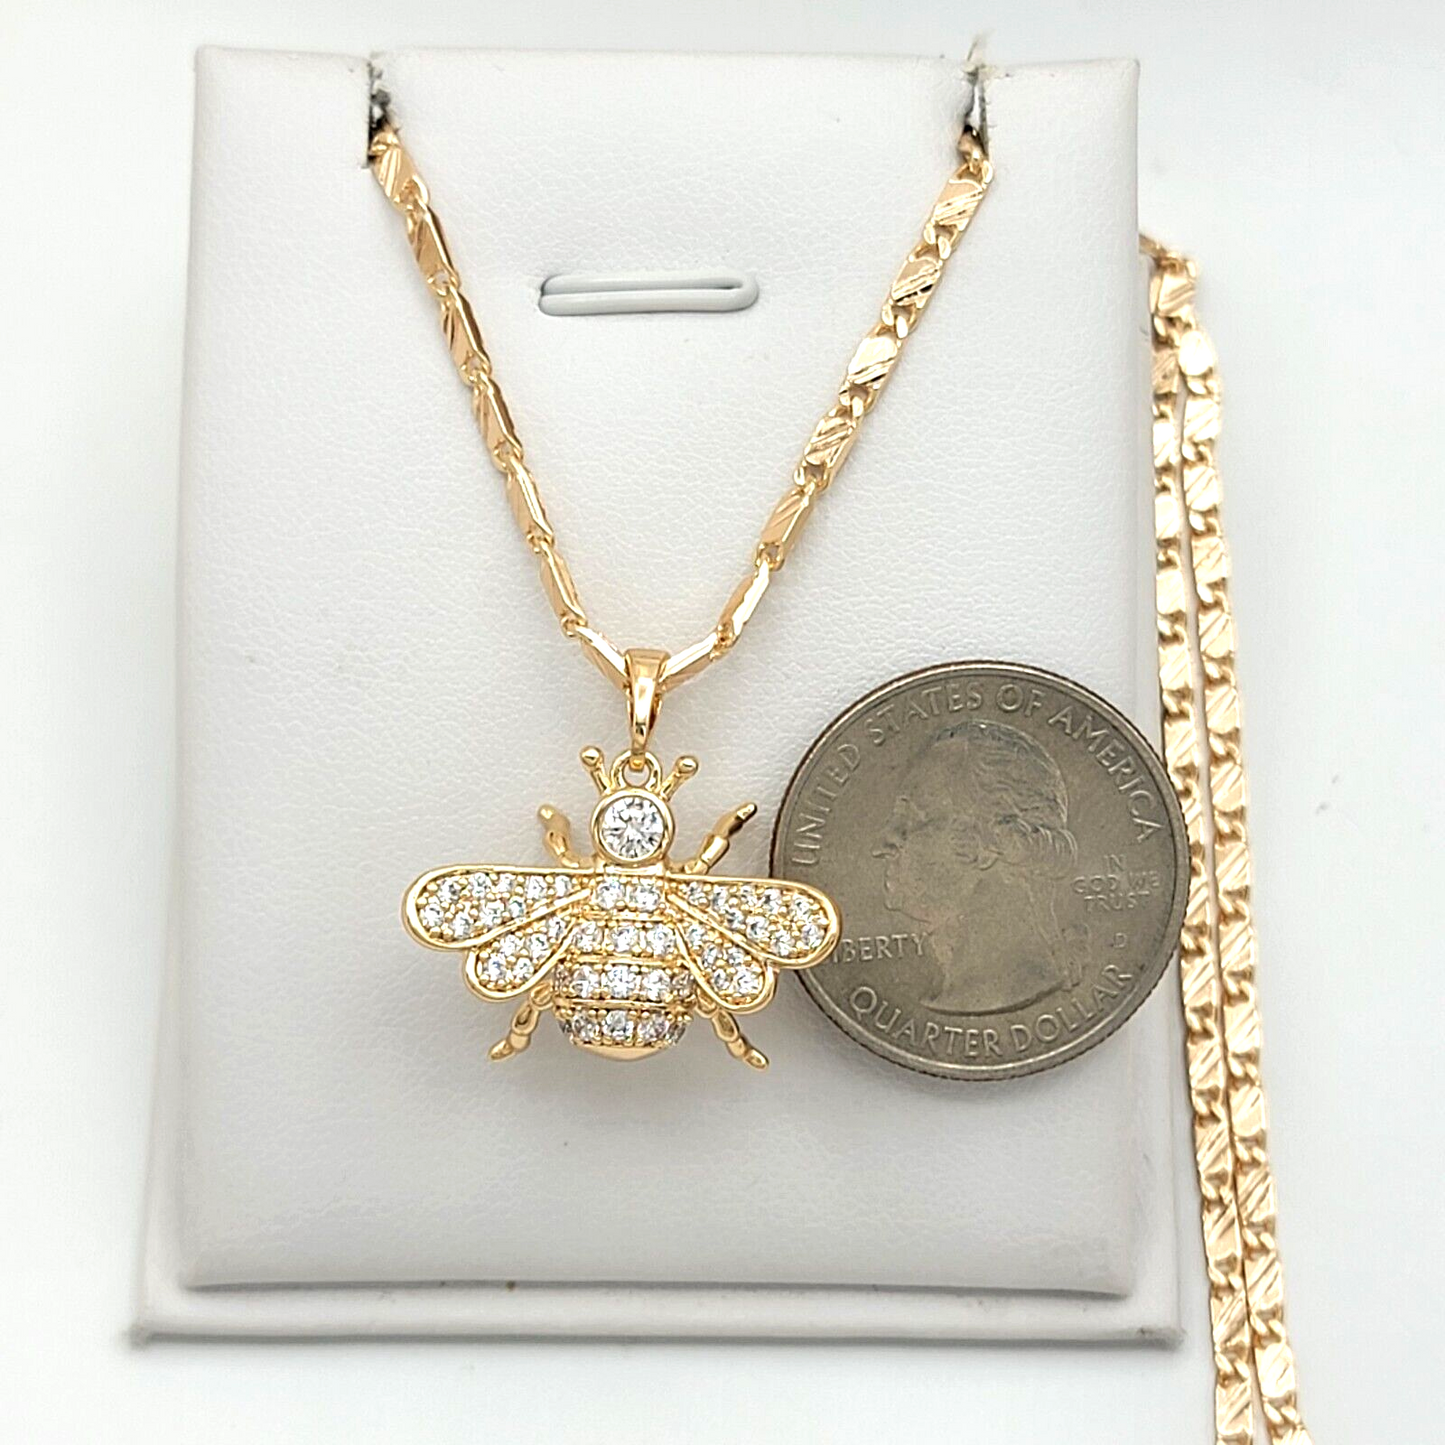 Necklaces - 18K Gold Plated. Clear CZ Queen Bee Pendant & Chain. Diligence Wisdom